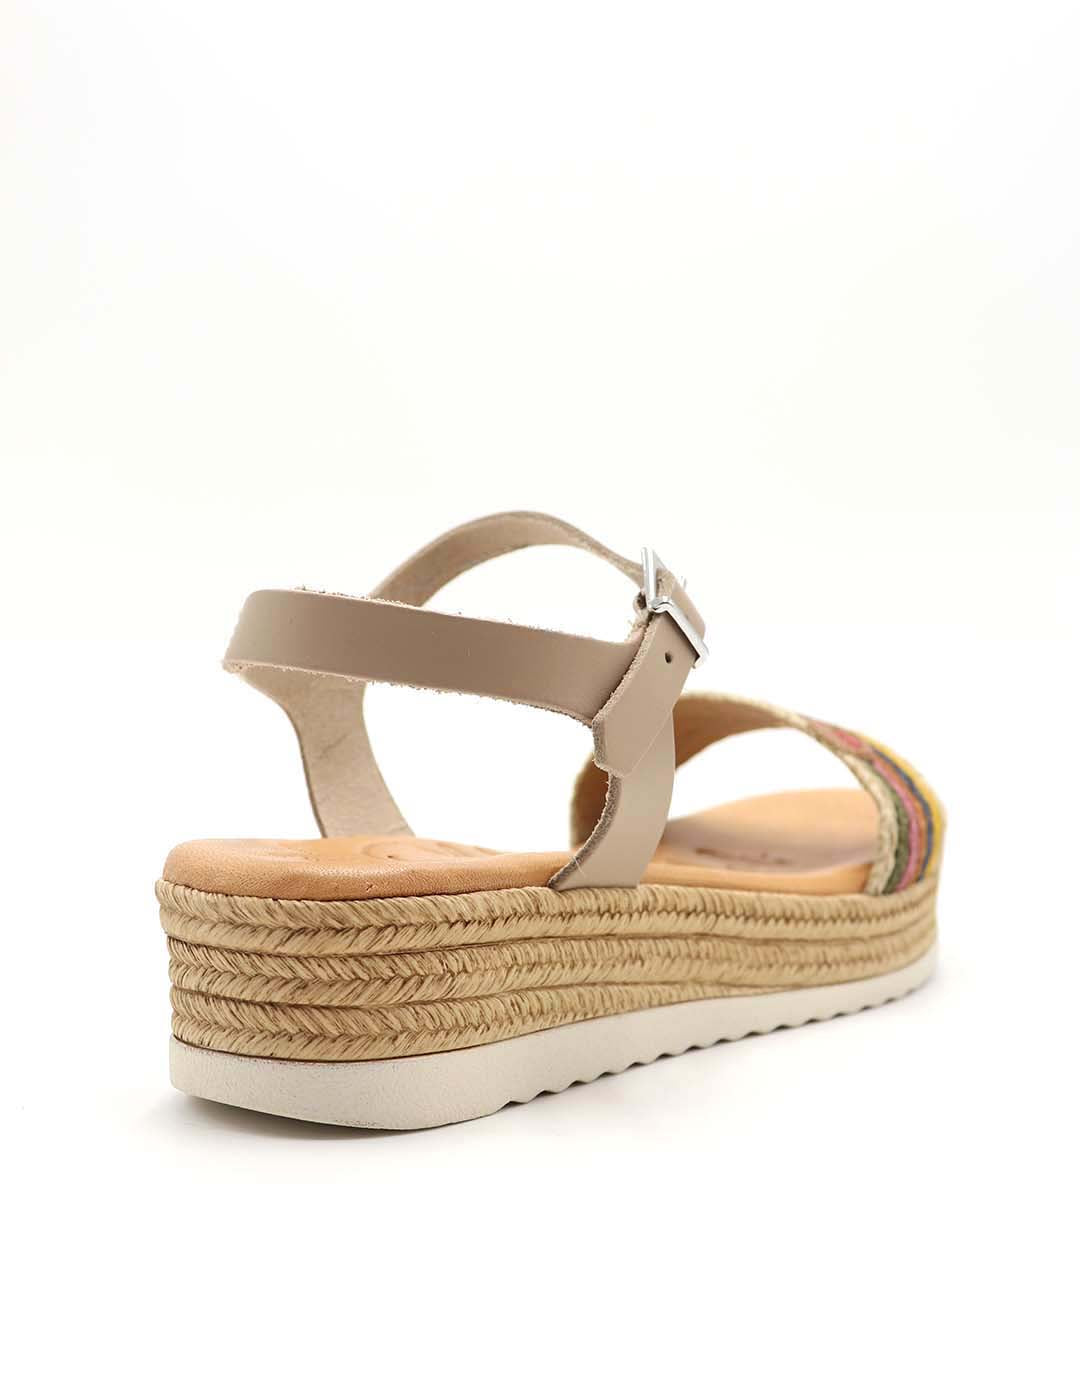 Sandalia OH! MY SANDALS Mujer Taupe / Multicolor